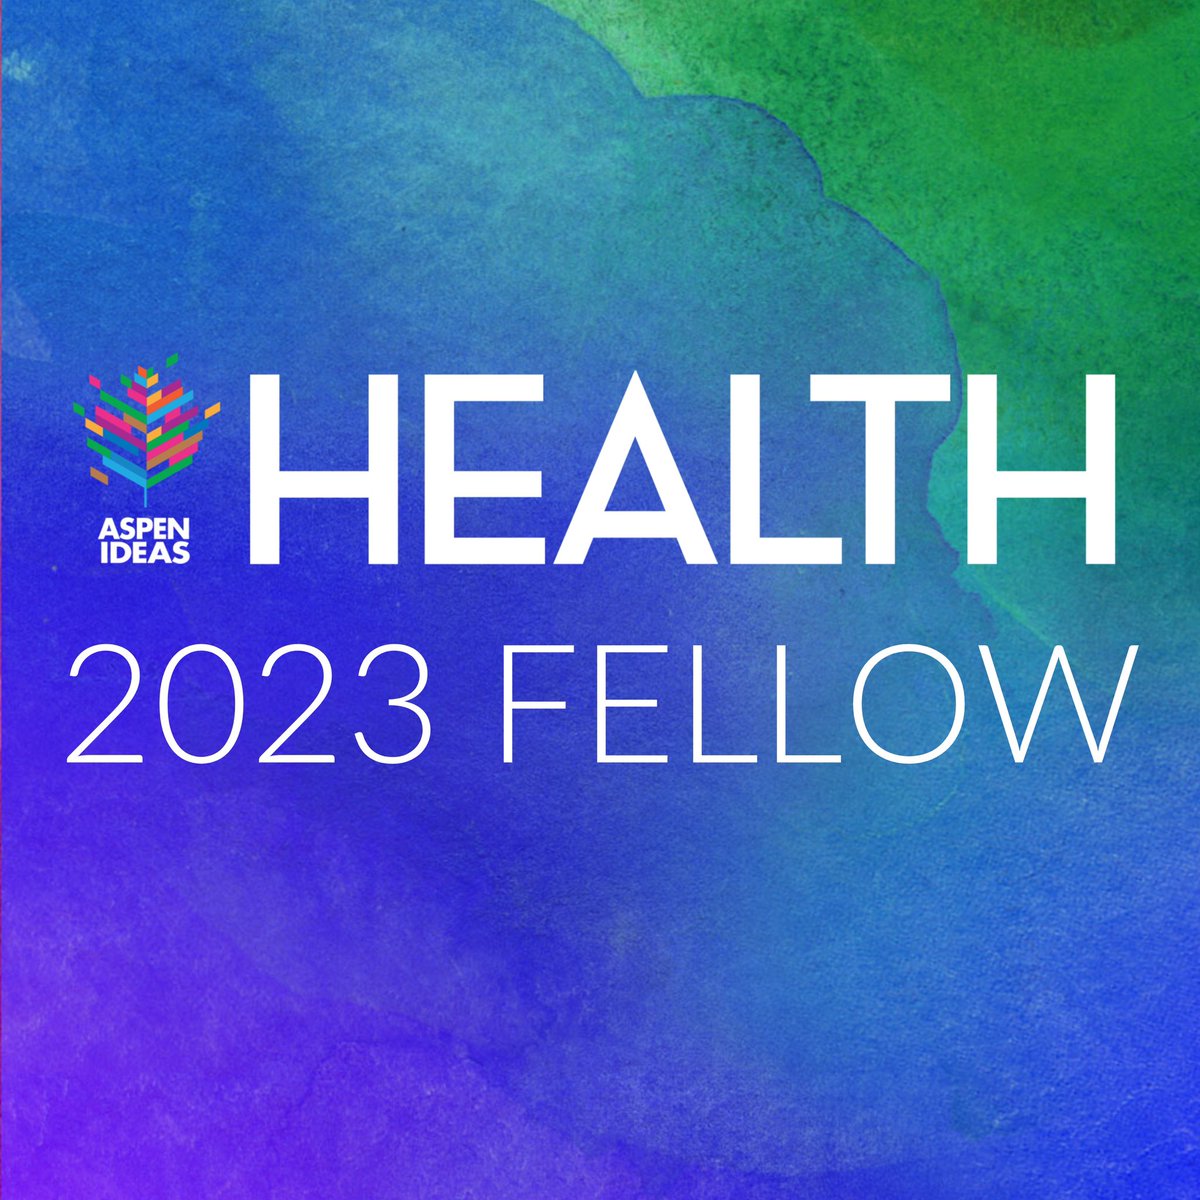 Incredibly honored to be a 2023 #AspenIdeasHealth Fellow at the @AspenIdeas Festival. It’s going to be a great week of exploring bold approaches to better health with other leaders, innovators, and advocates around the world. Big thanks to @lcyh for the nomination!